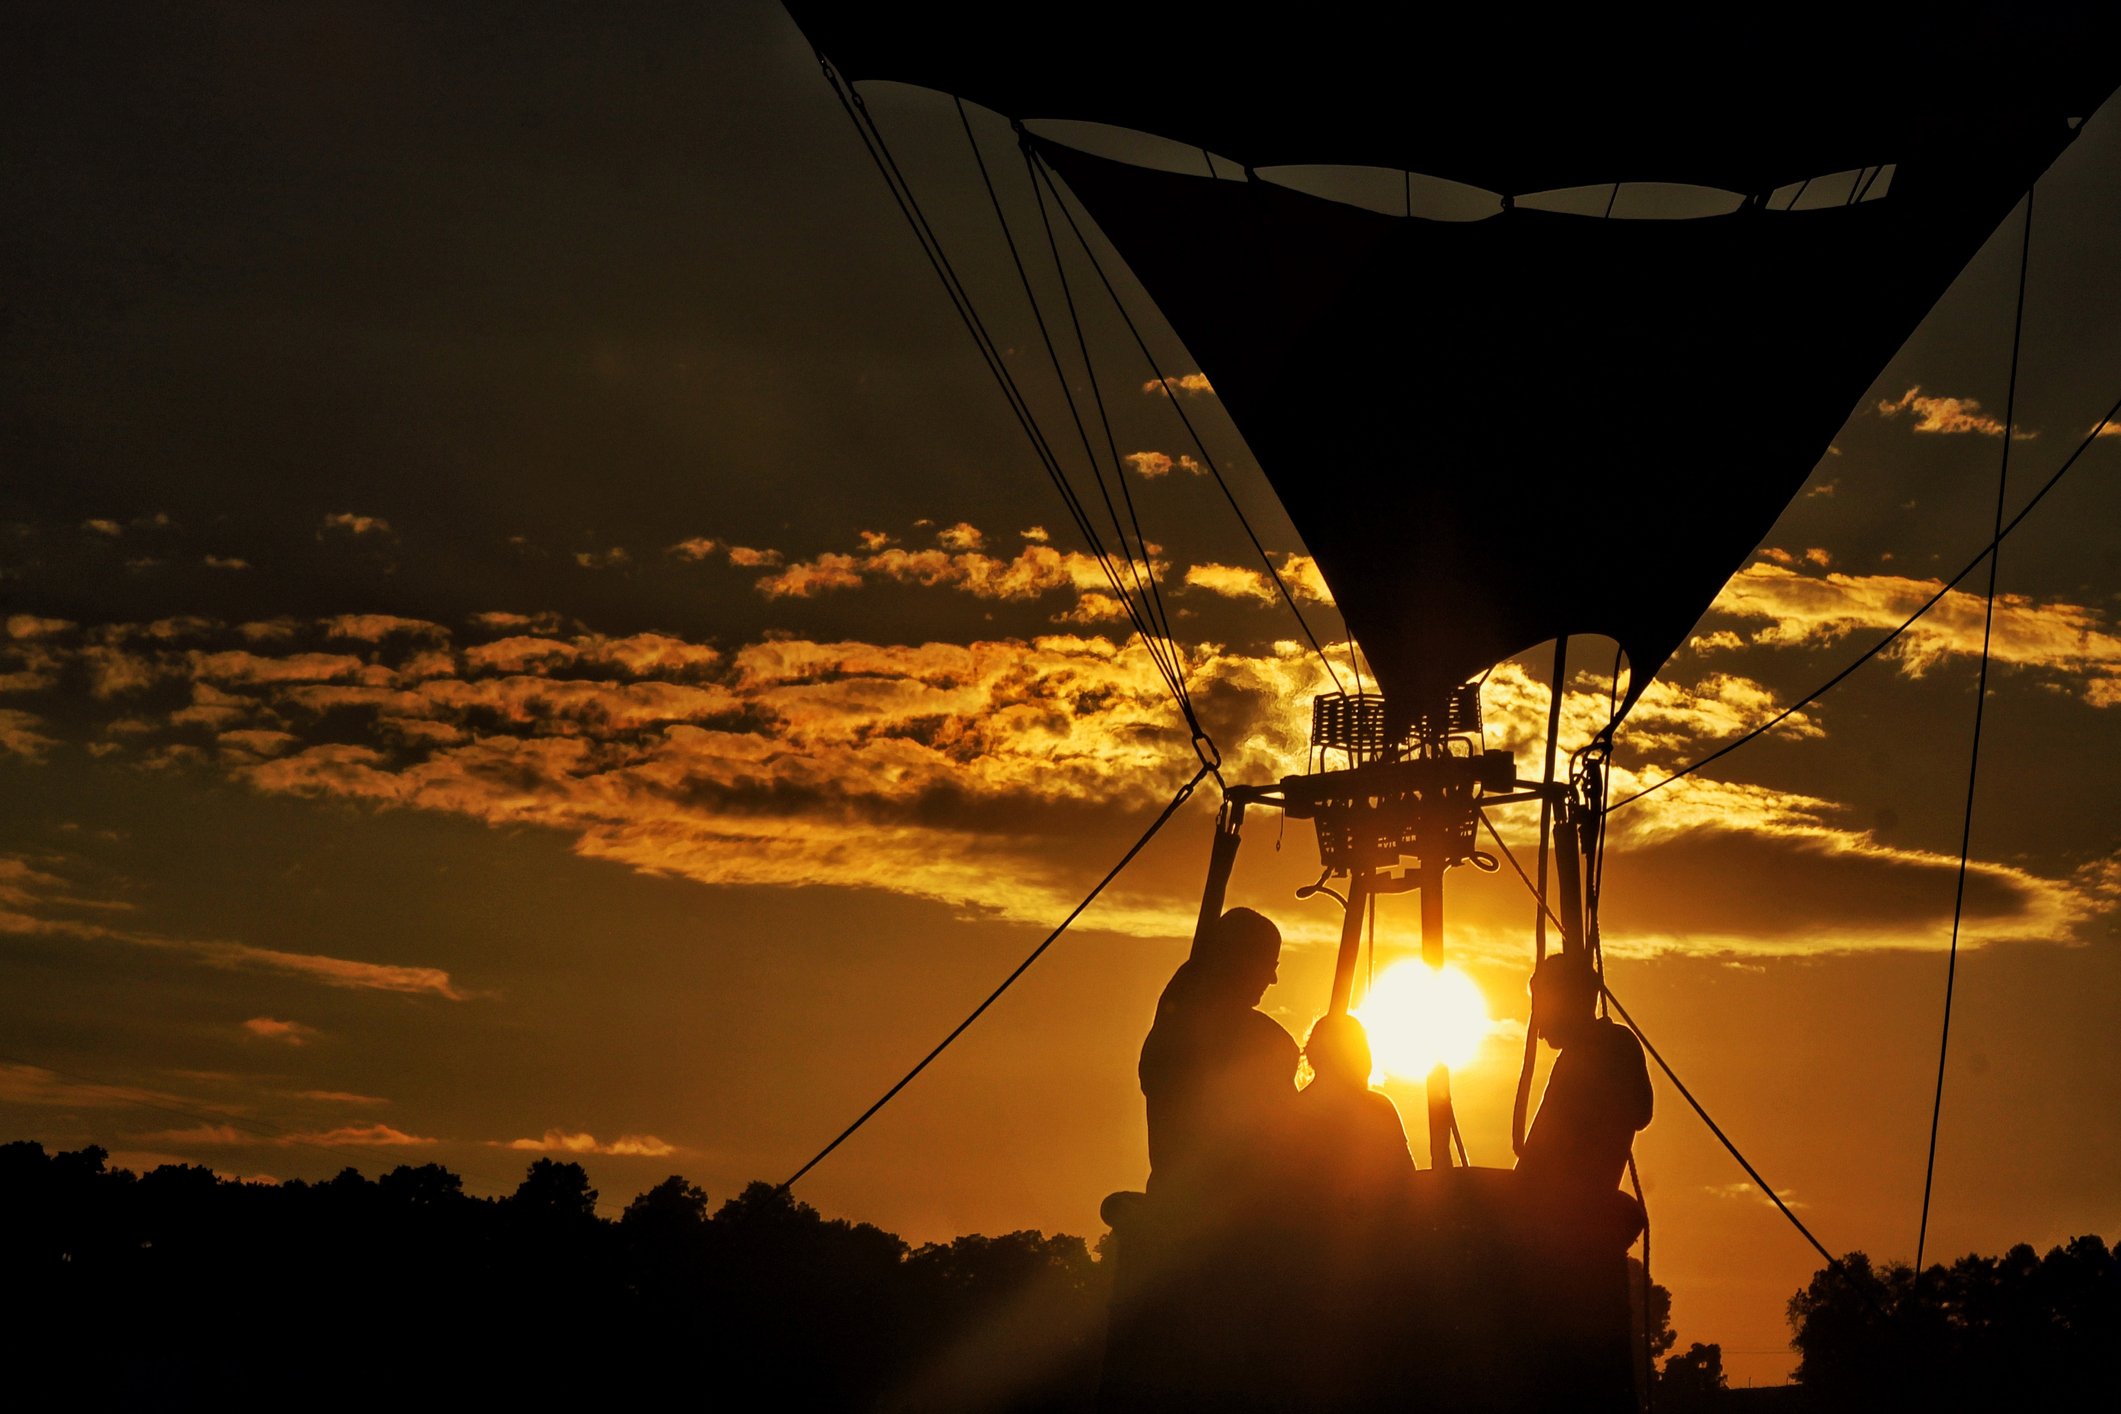 Long angle view of people in a hot air ballon against the sky during sunset | Photo: Getty Images